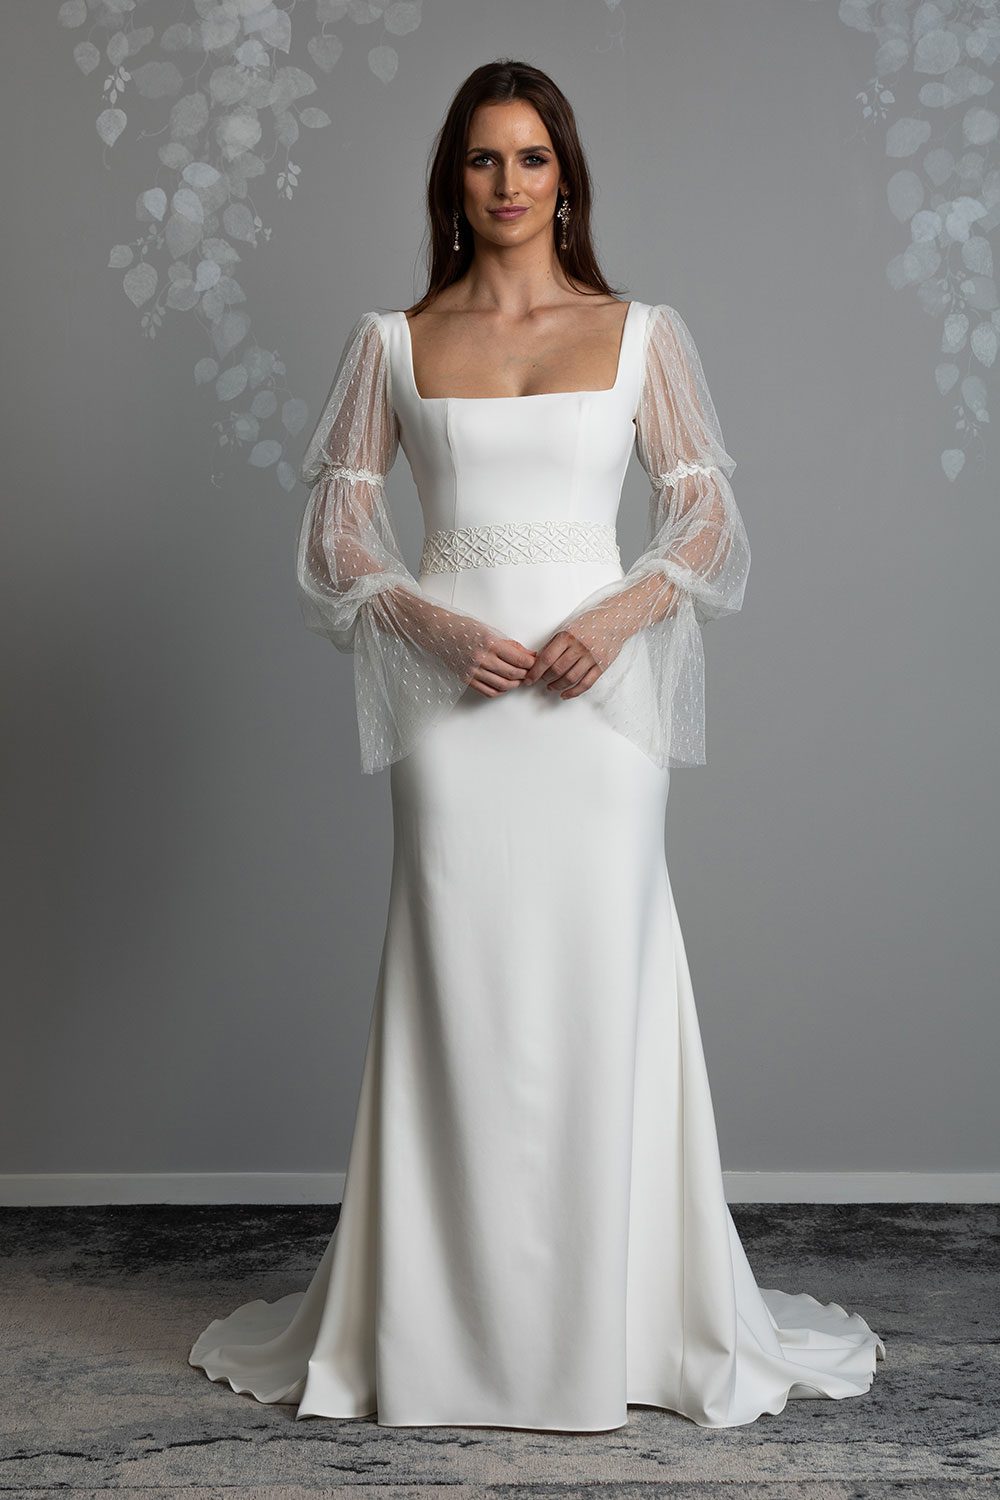 Eden Wedding Dress by Vinka Design - Featuring a square neckline that draws the eye to the wearer's décolletage and dreamy, soft, tulle puff sleeves with corded embroidered lace adorning the arms in tiers. The low back is complemented by a curved, scoop cut, with delicate self-covered crepe button embellishments trailing down the spine. Full length view of model wearing square neck bodice with soft tulle puff sleeves and embroidered lace